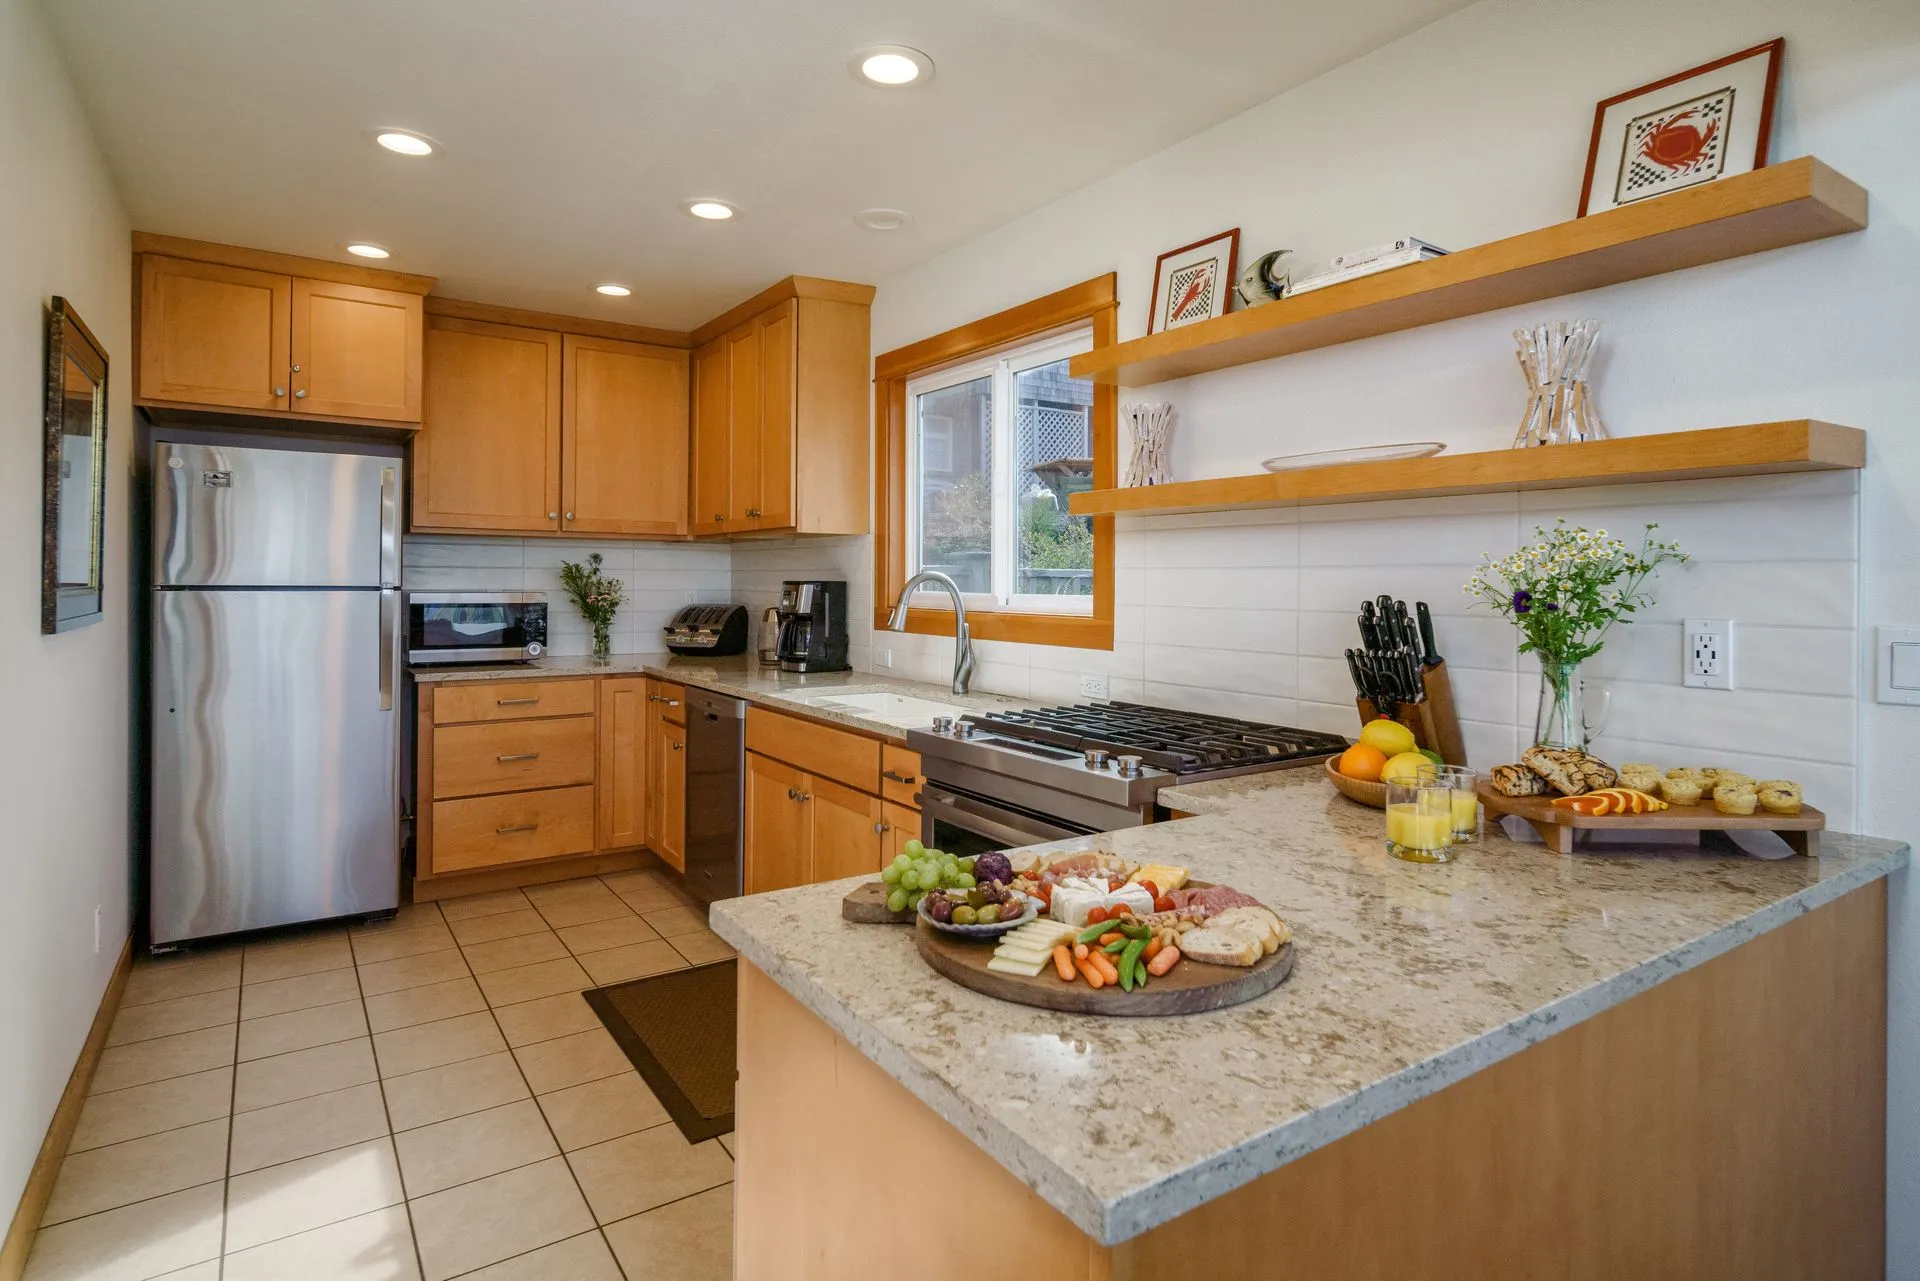 Vacation Rental in Cannon Beach, Pacific House kitchen with fridge, microwave, stove and coffee maker